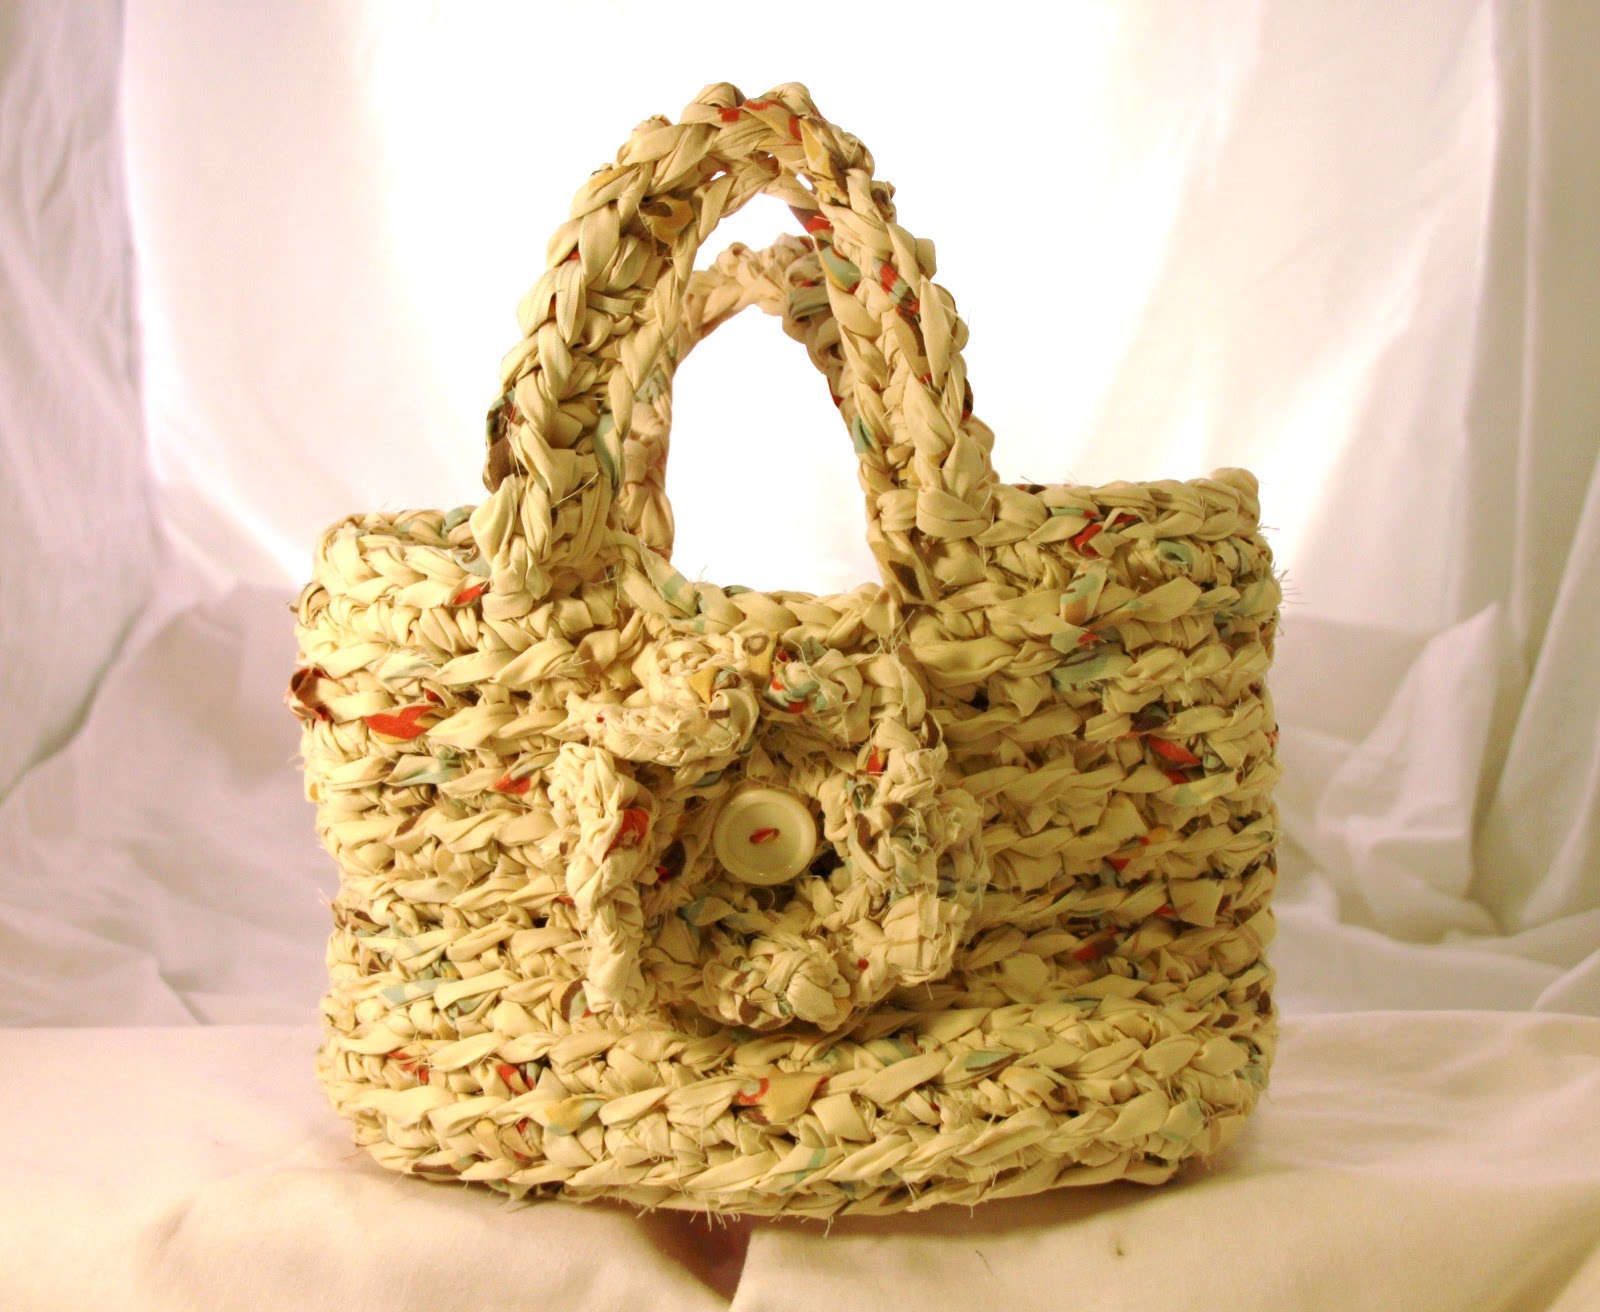 Retirement and Back to the Basics: Crocheted Baskets/Bags